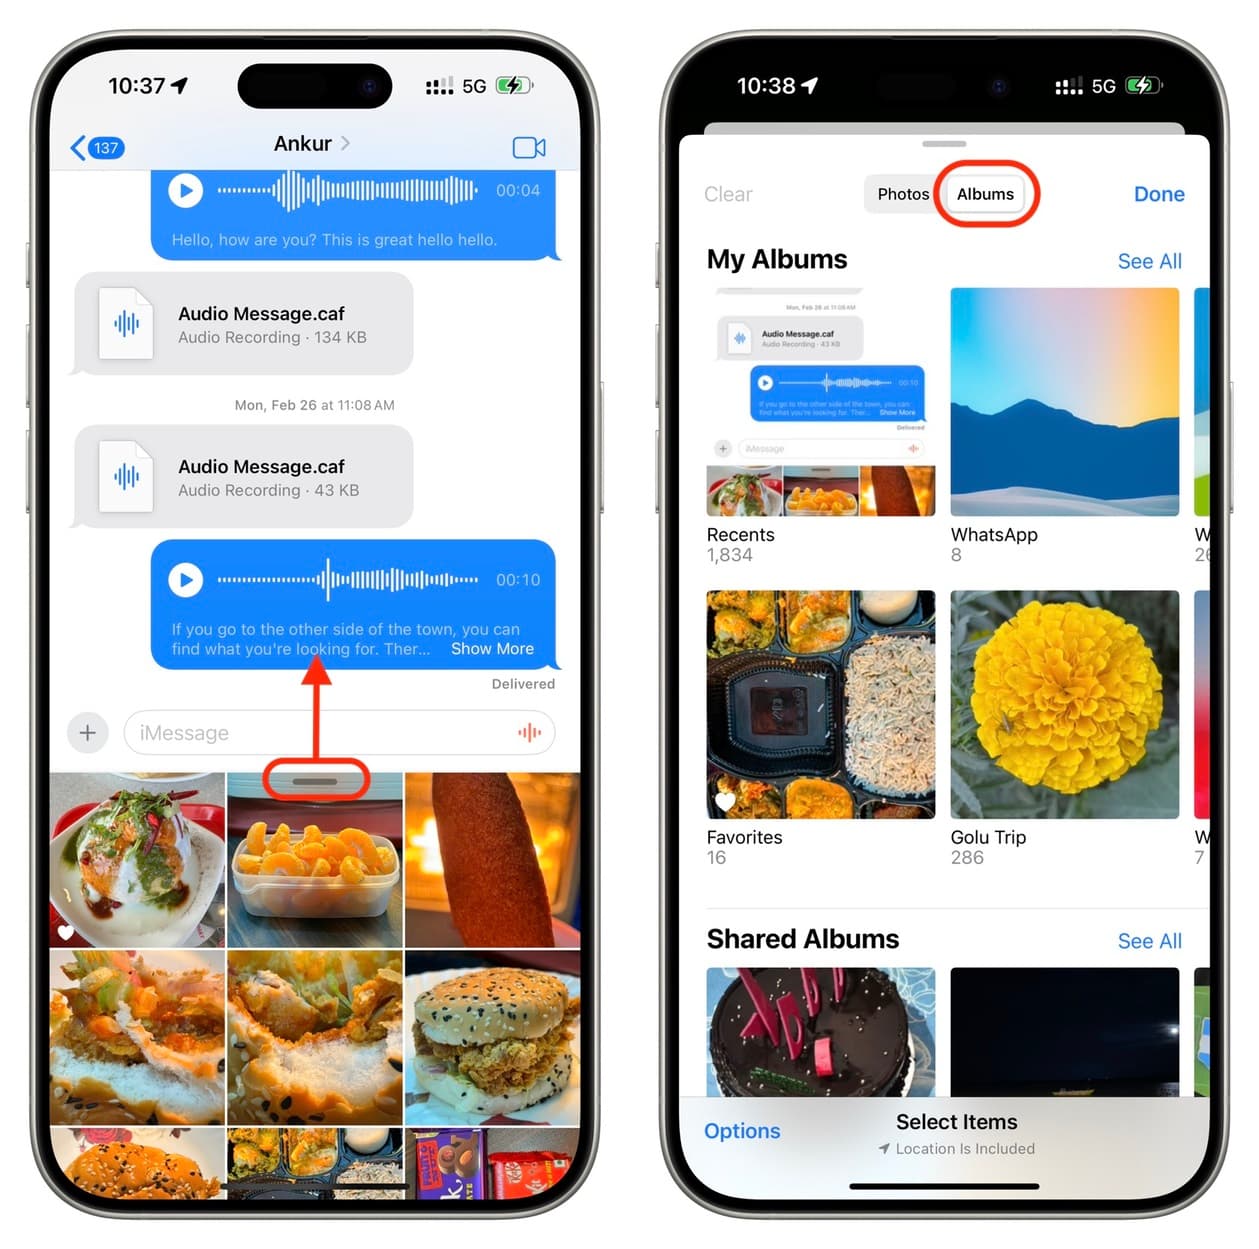 Pull up to bring the full screen Photo picker inside Messages app on iPhone